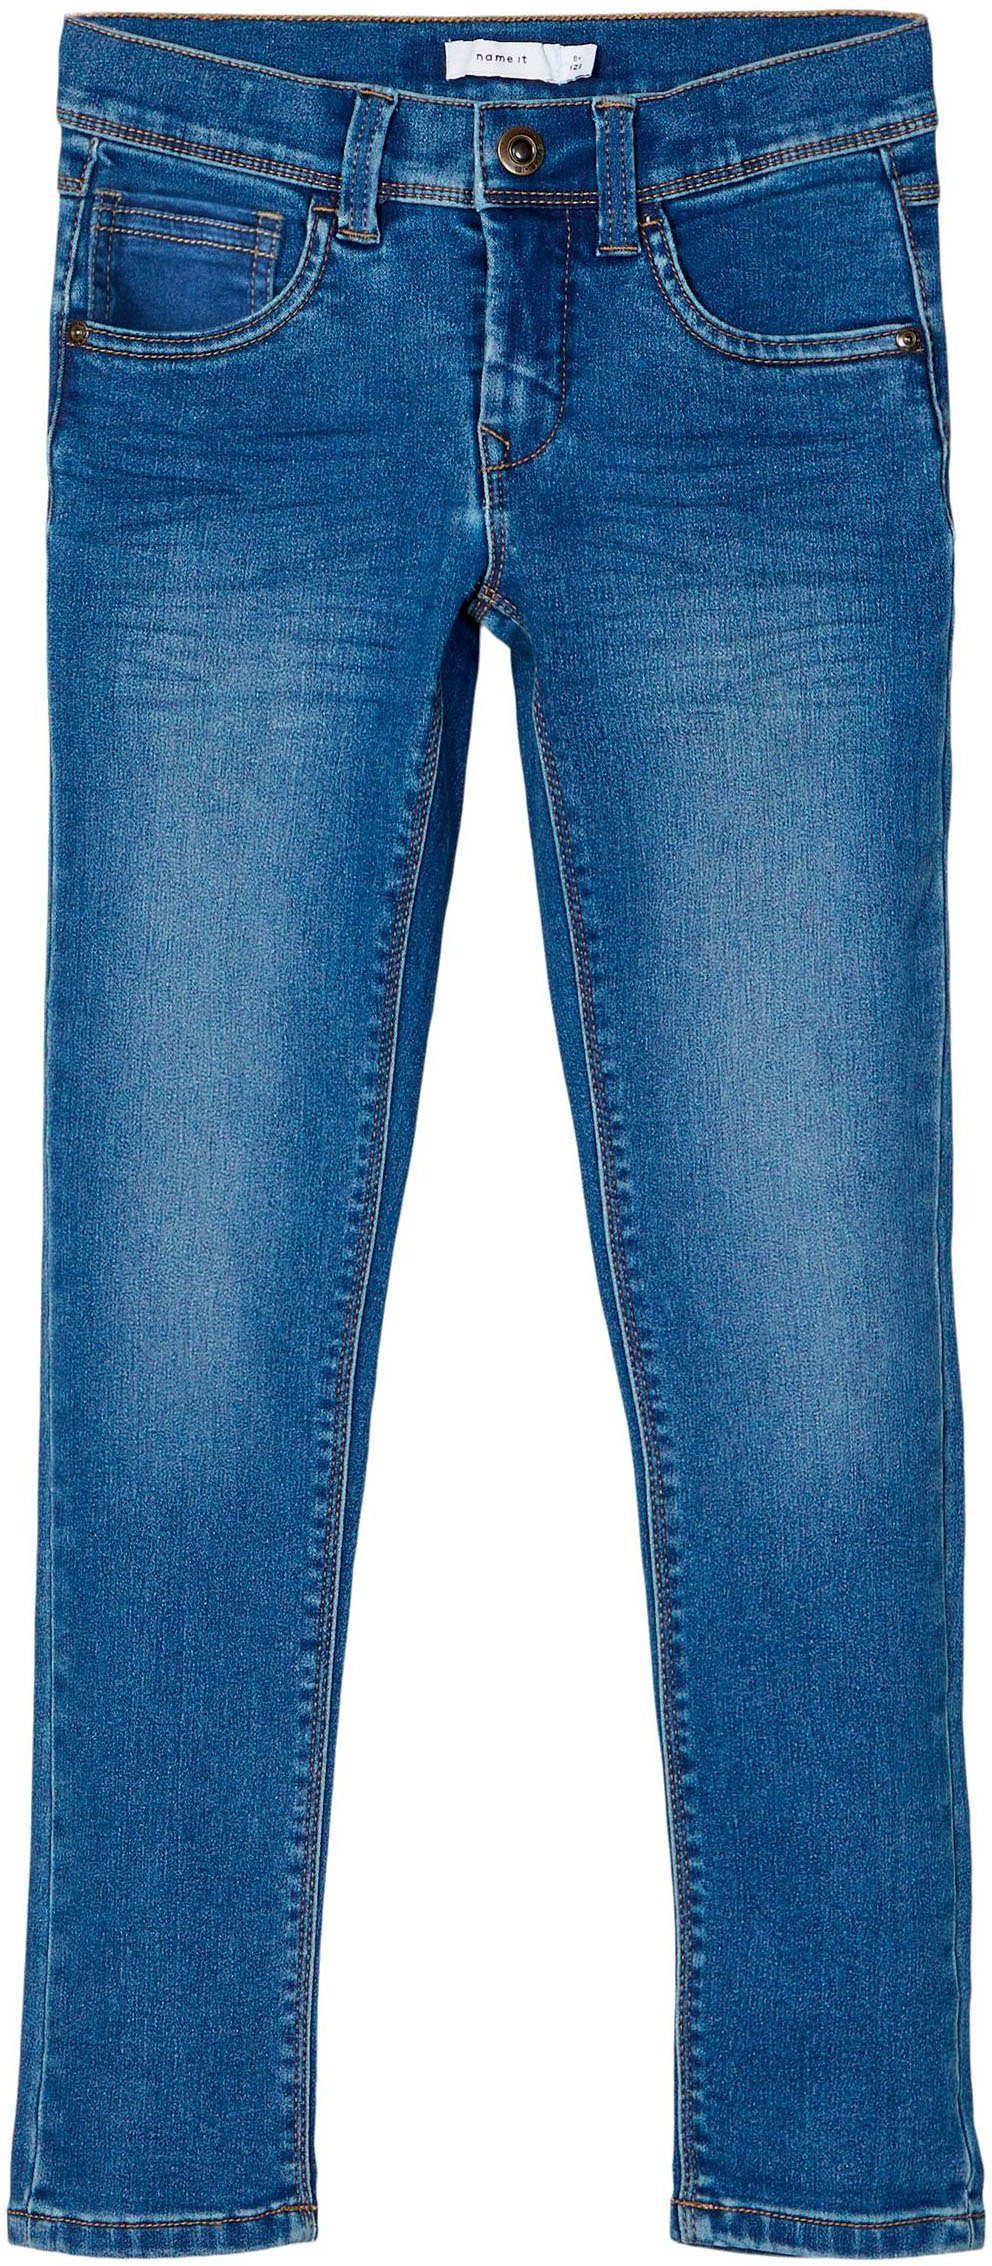 in It Klassischer Waschung cooler Name 5-Pocket-Style Stretch-Jeans,